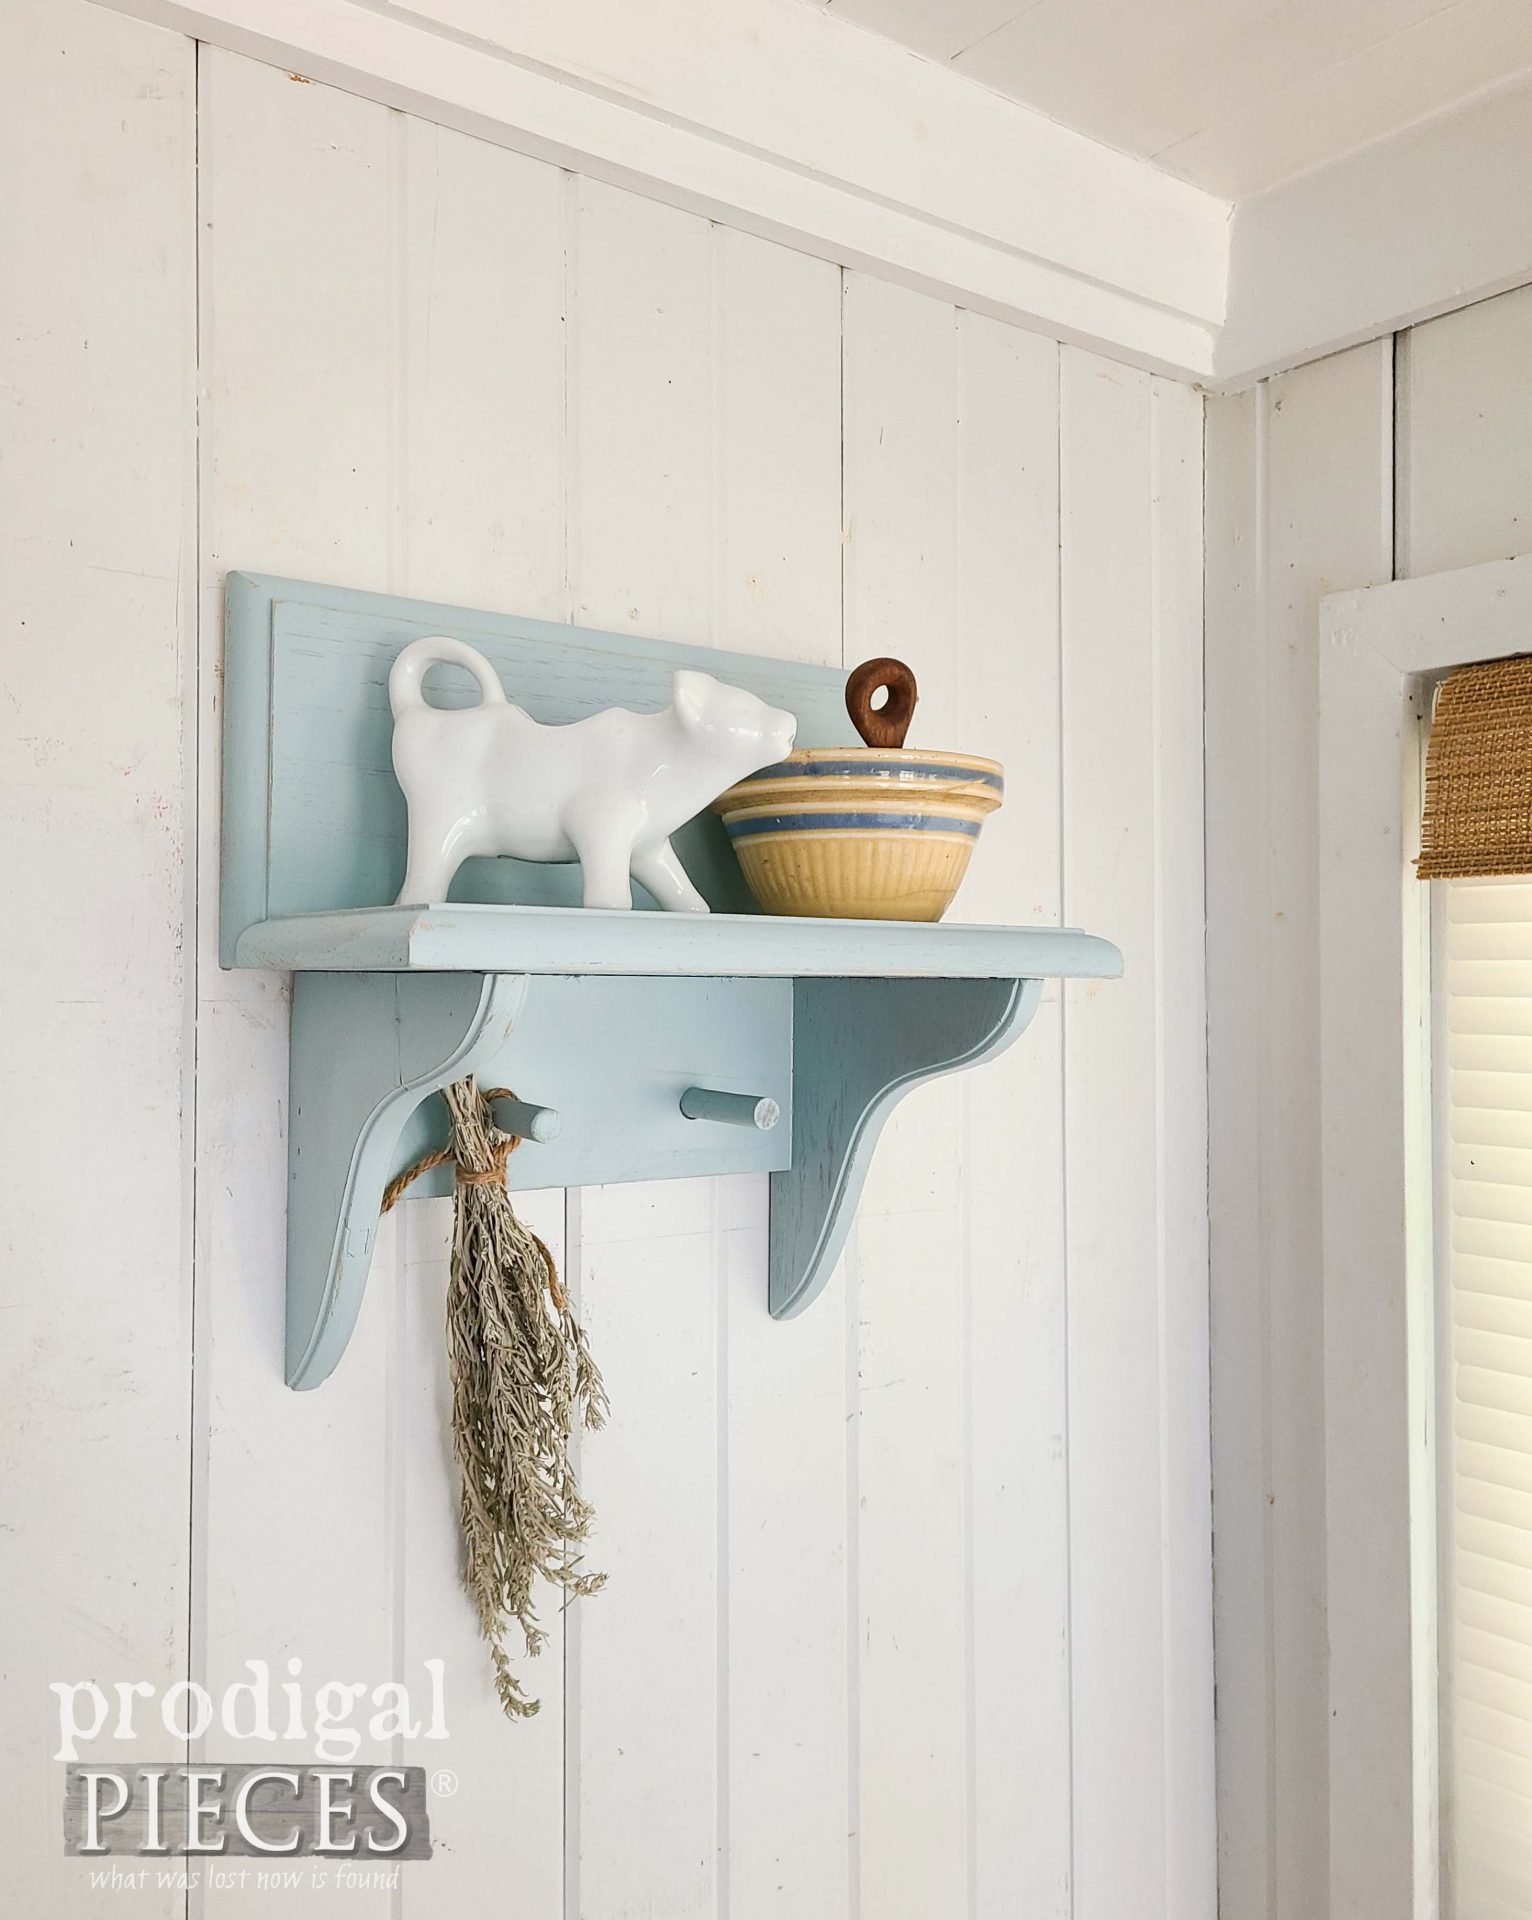 Upcycled Knick Knack Shelf from Accent Table by Prodigal Pieces Kids CREATE | prodigalpieces.com #prodigalpieces #diy #kids #farmhouse